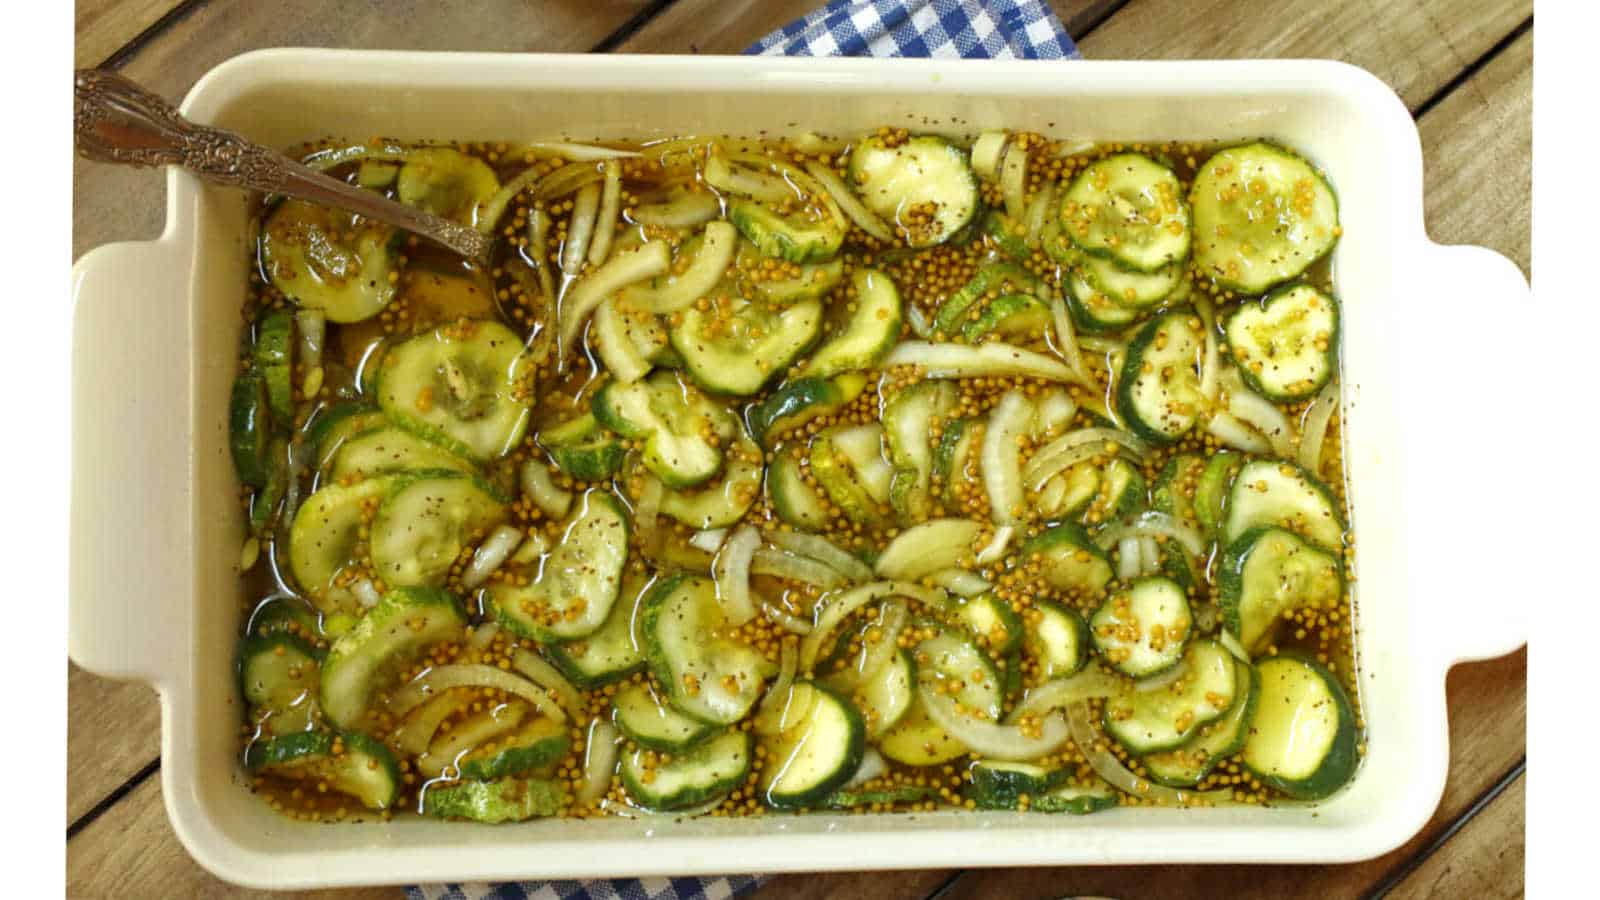 Bread and butter pickles in brine in a white dish.